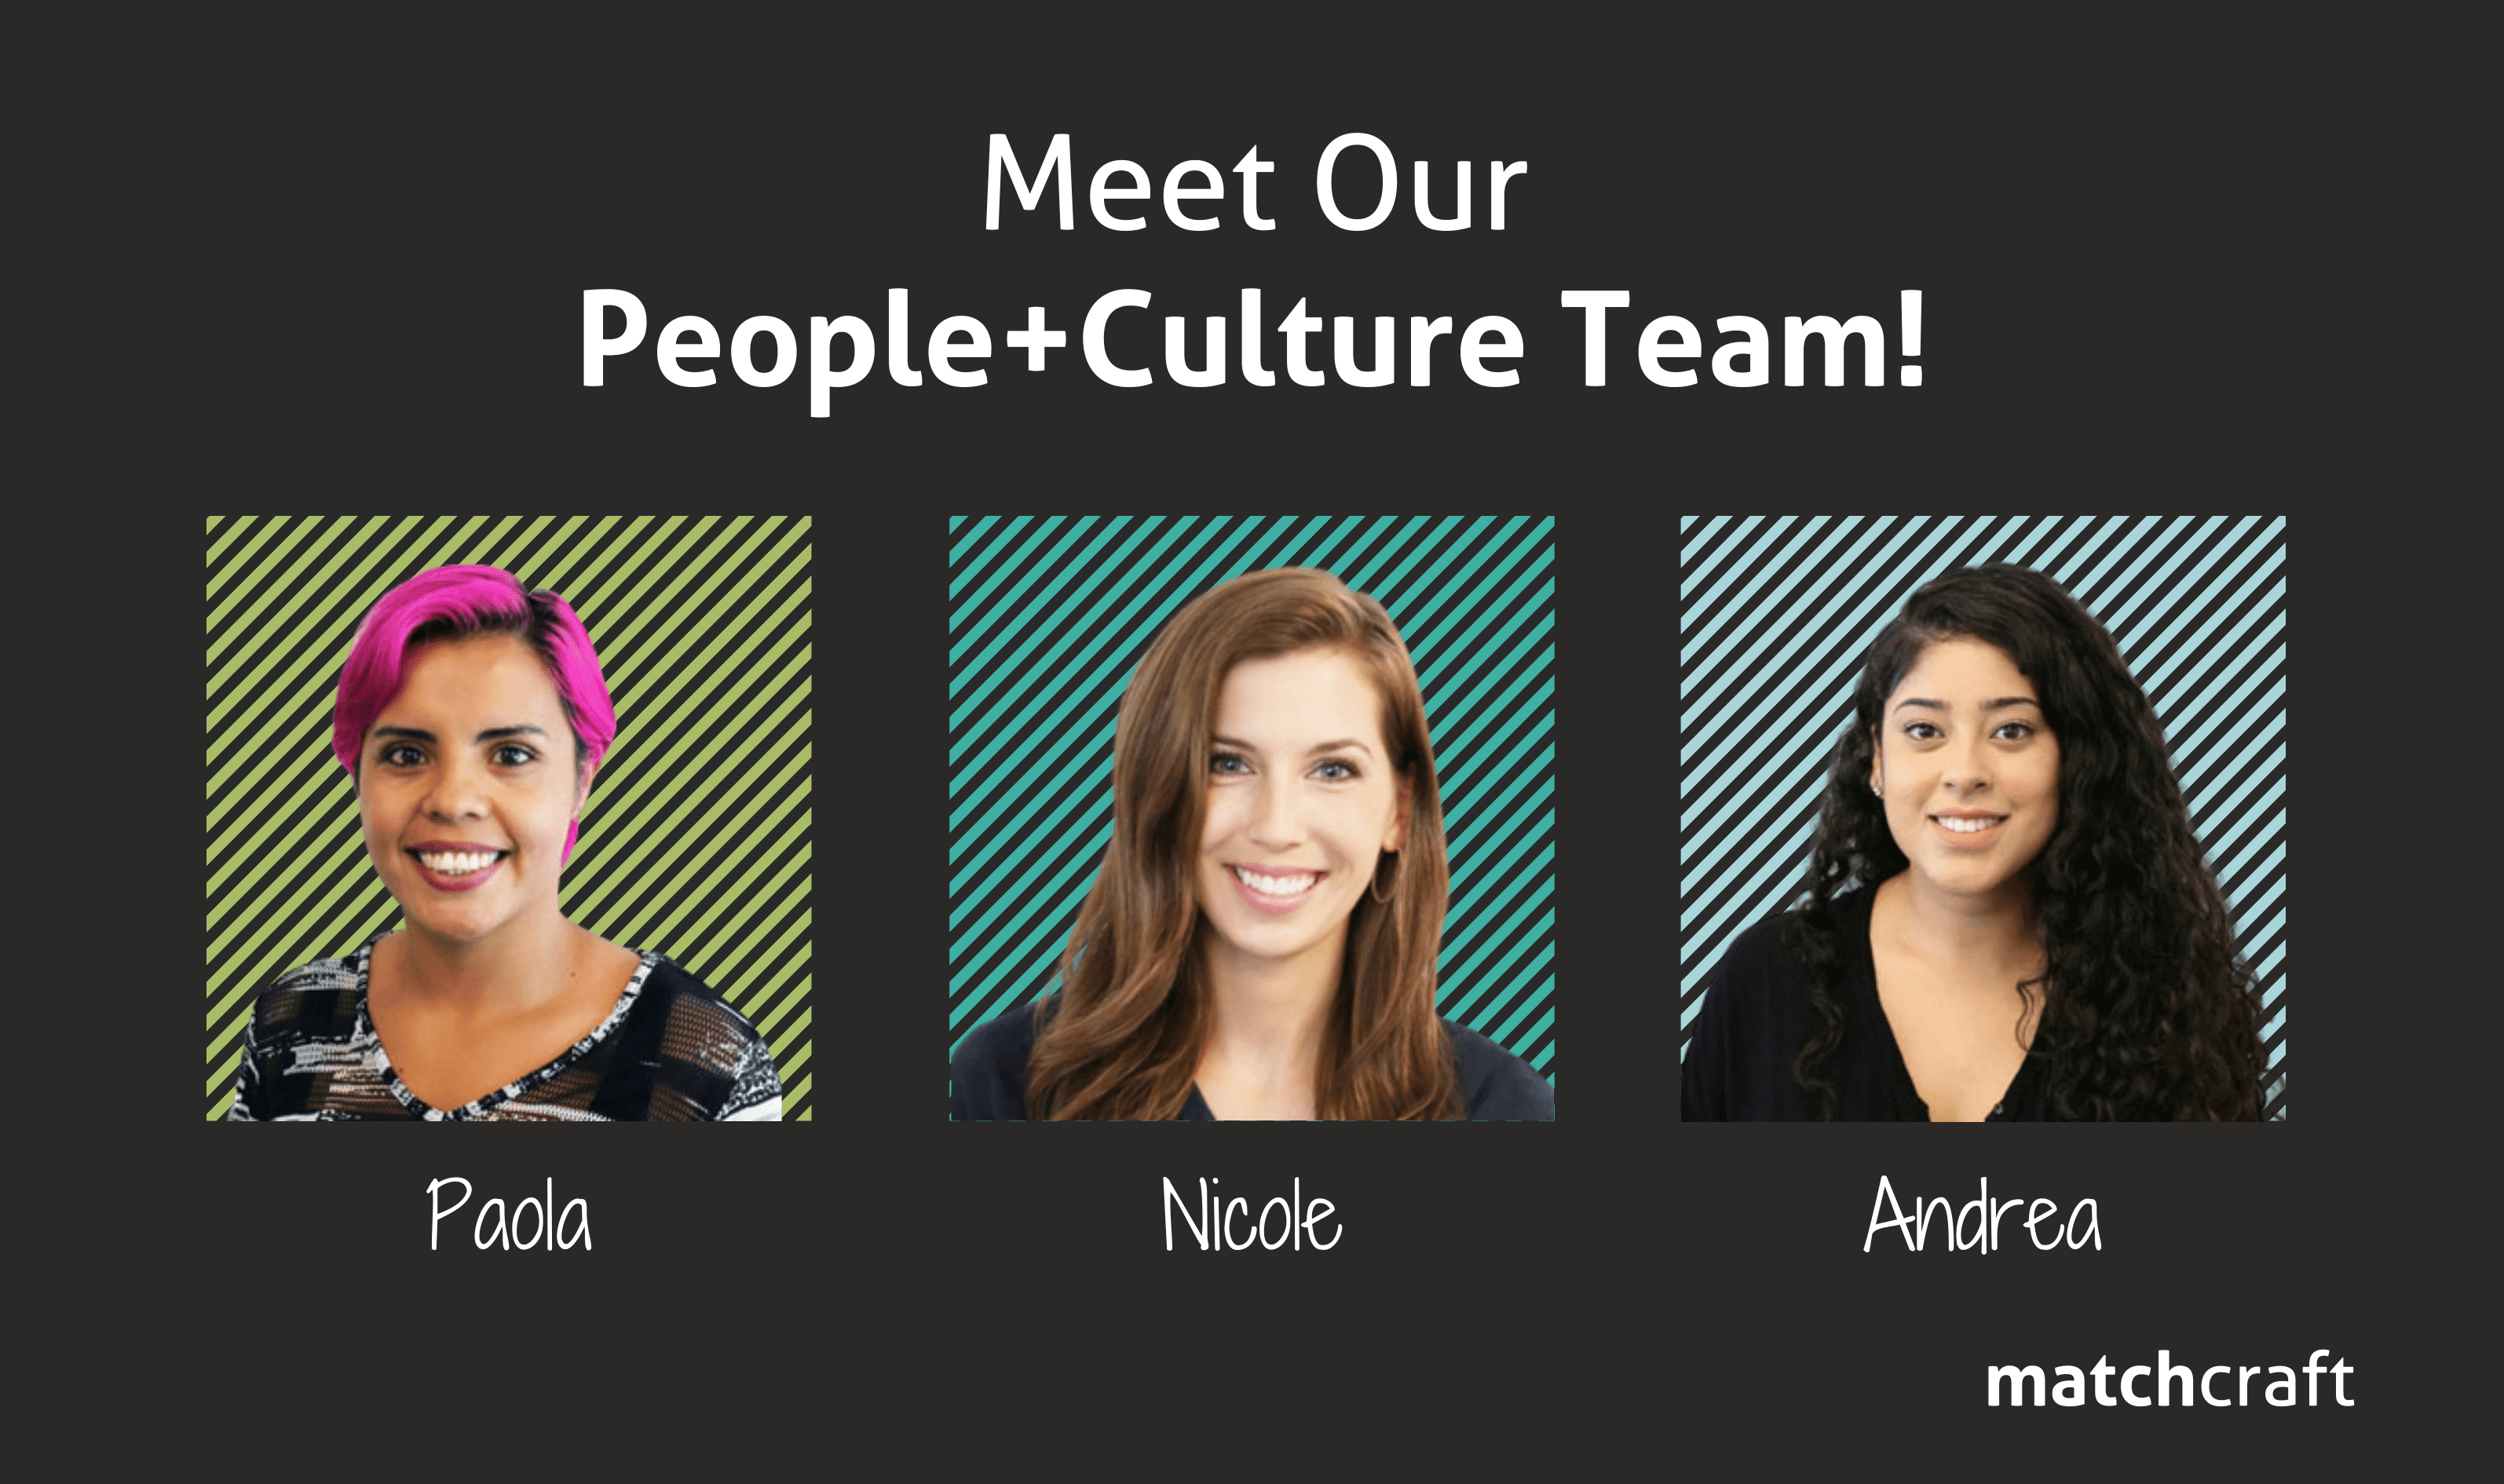 Meet Our People+Culture Team